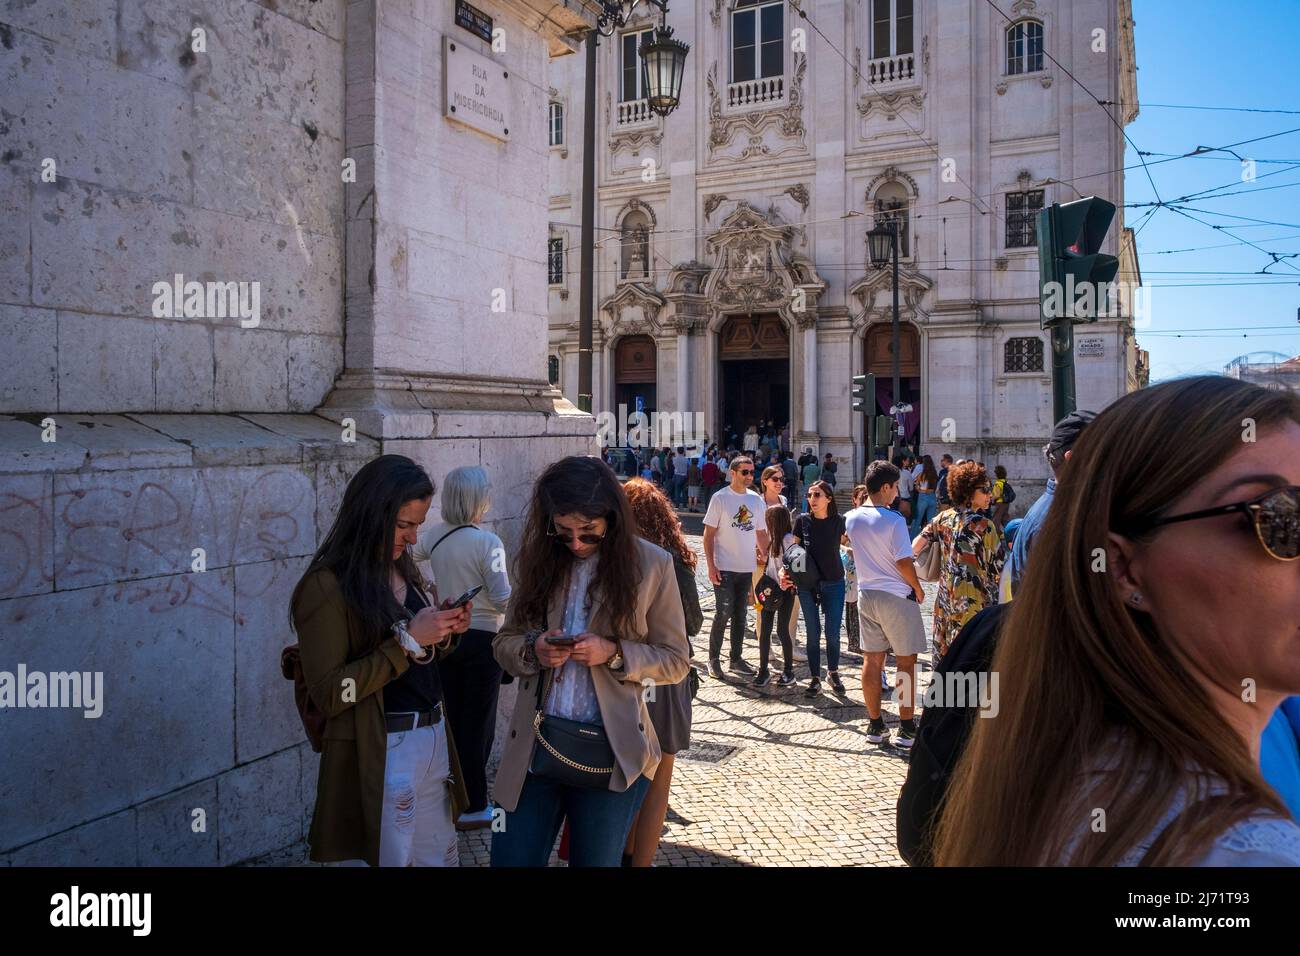 Tourists look at phones outside a church in Lisbon, Portugal Stock Photo